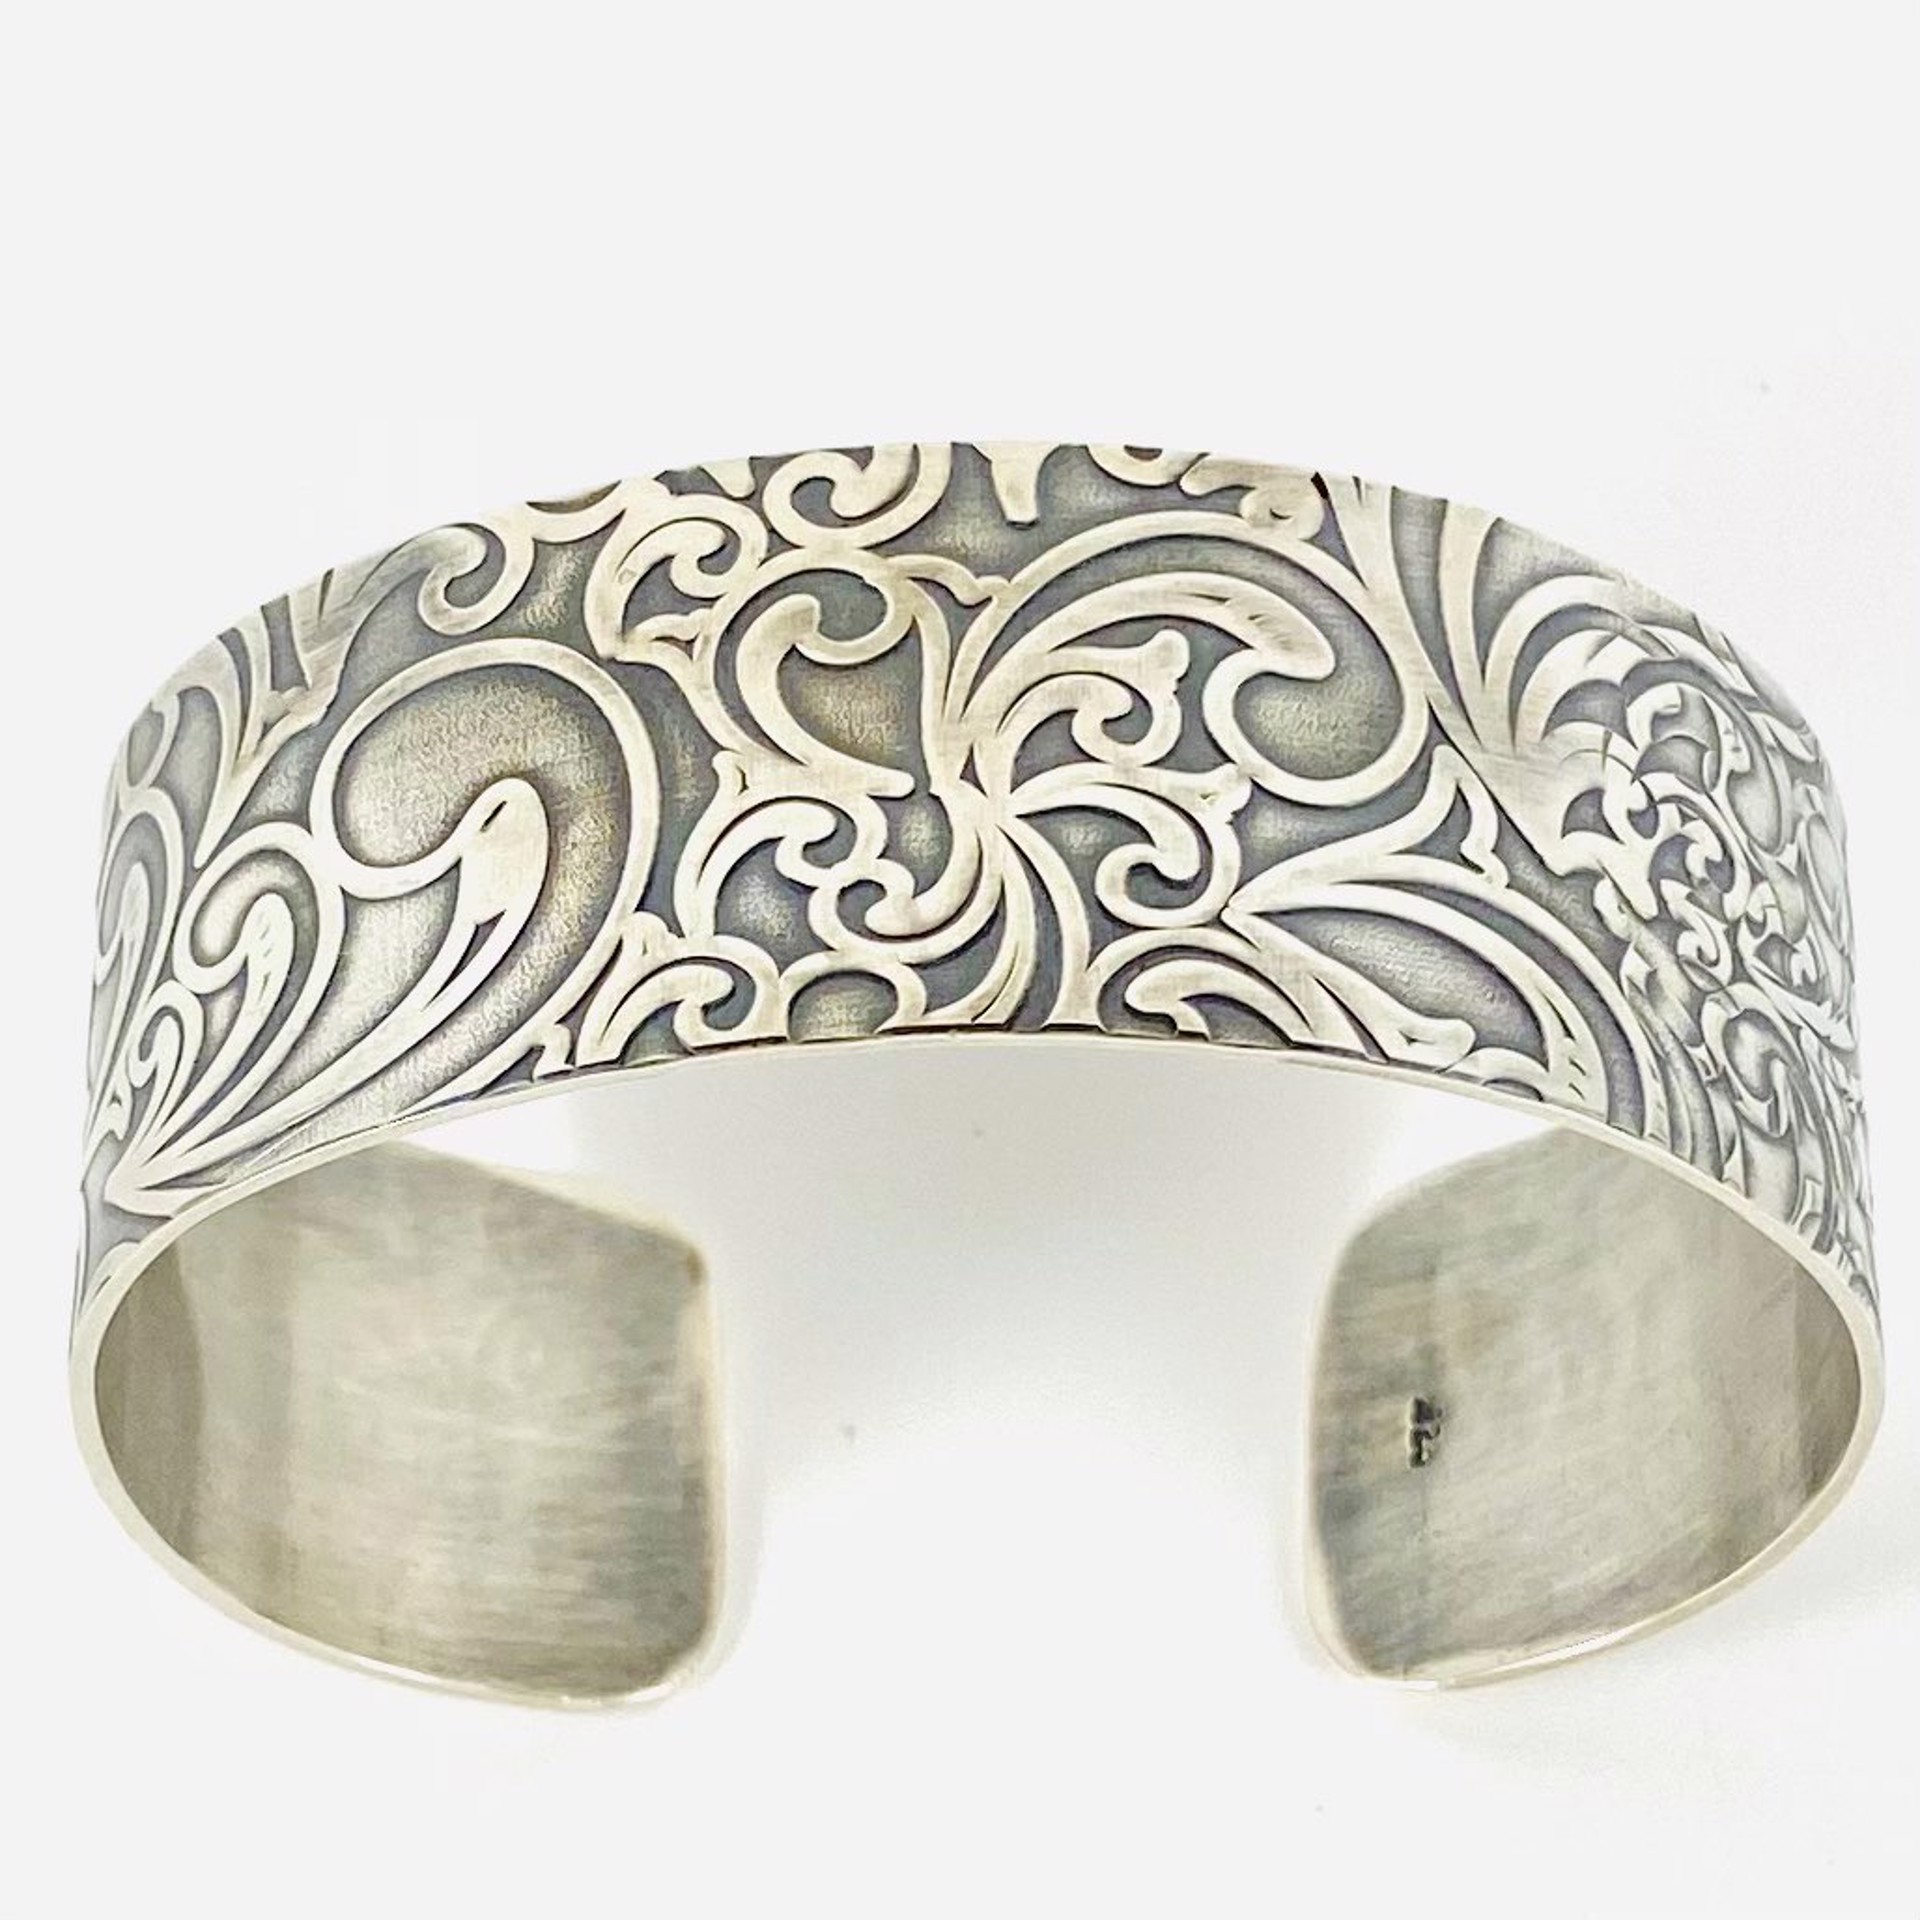 Rolled Design Silver Cuff Bracelet AB22-75 by Anne Bivens